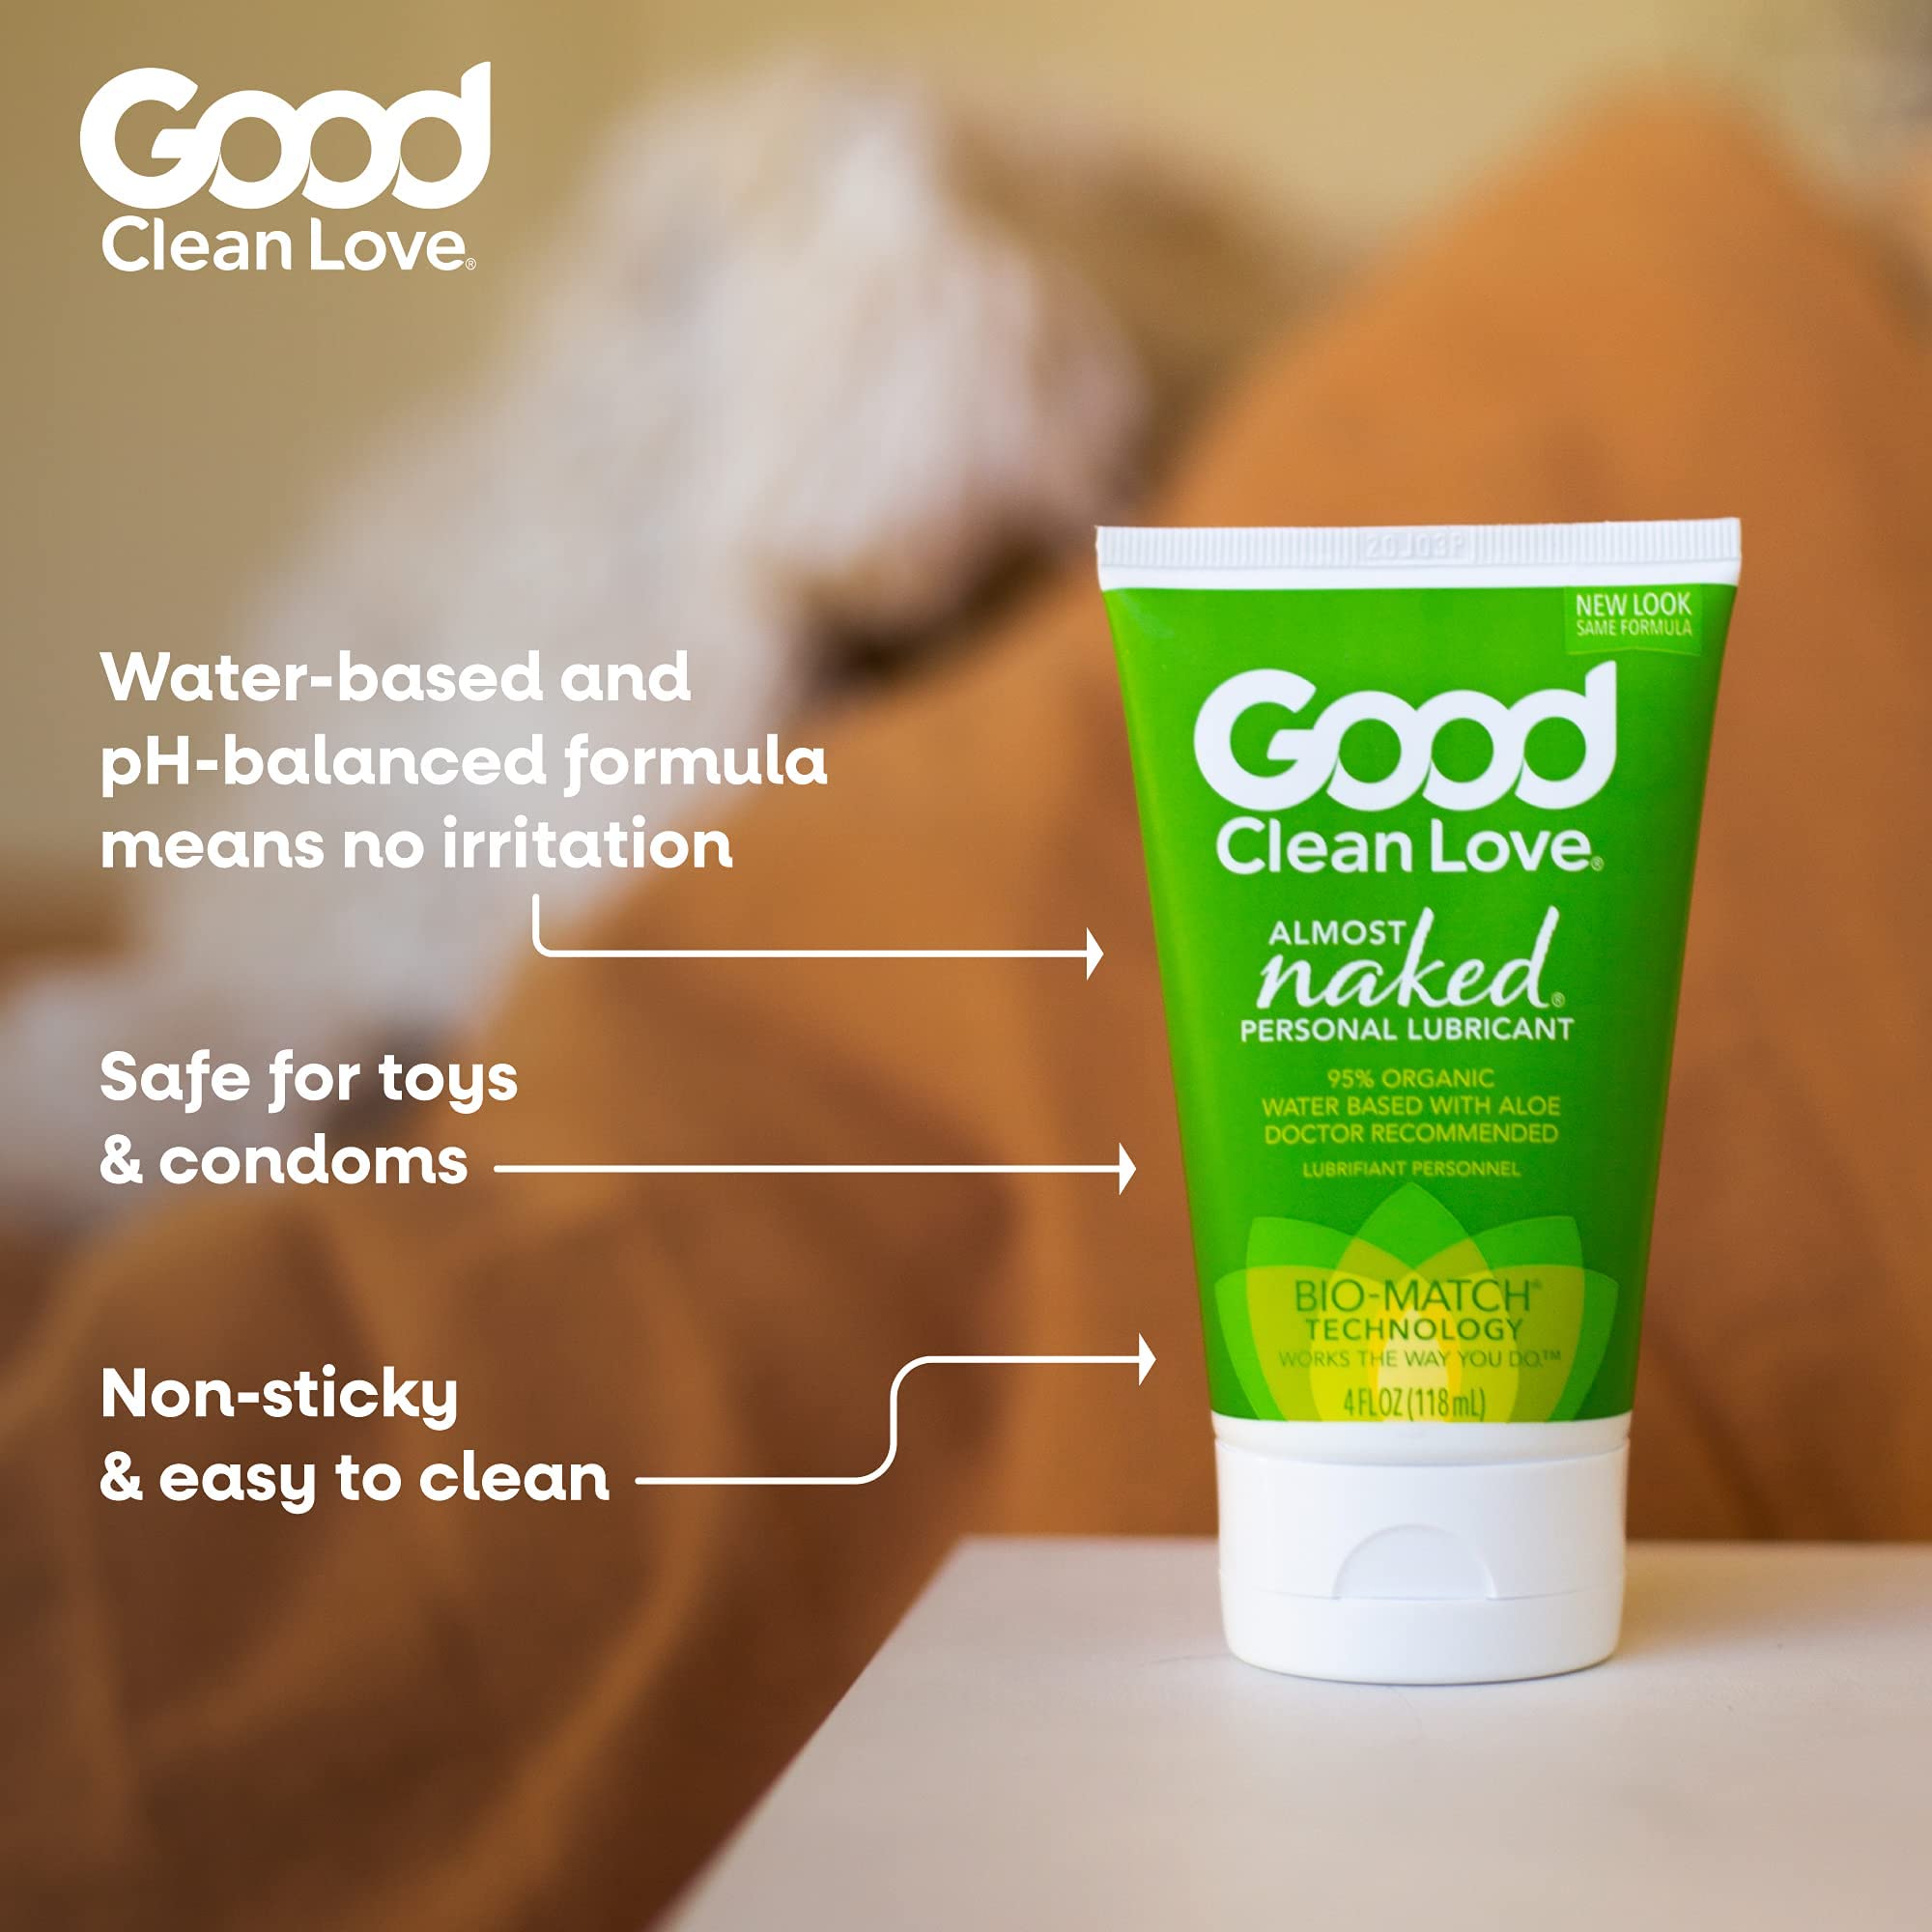 Good Clean Love: Almost Naked® Organic Personal Lubricant 4 oz - image 2 of 6